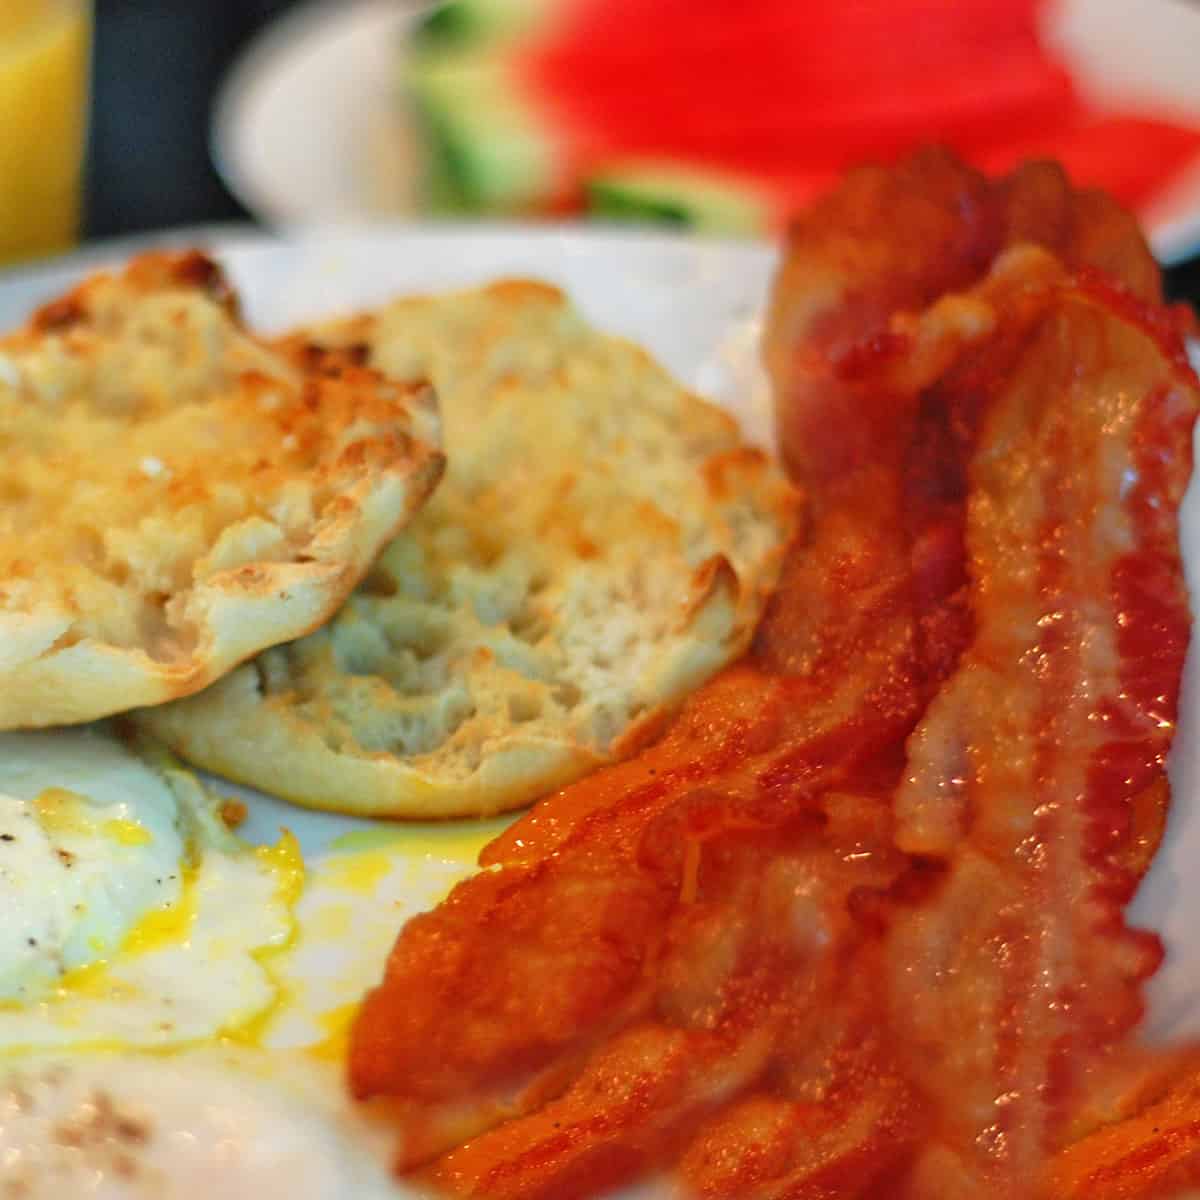 A plate of bacon, eggs, and English muffins.